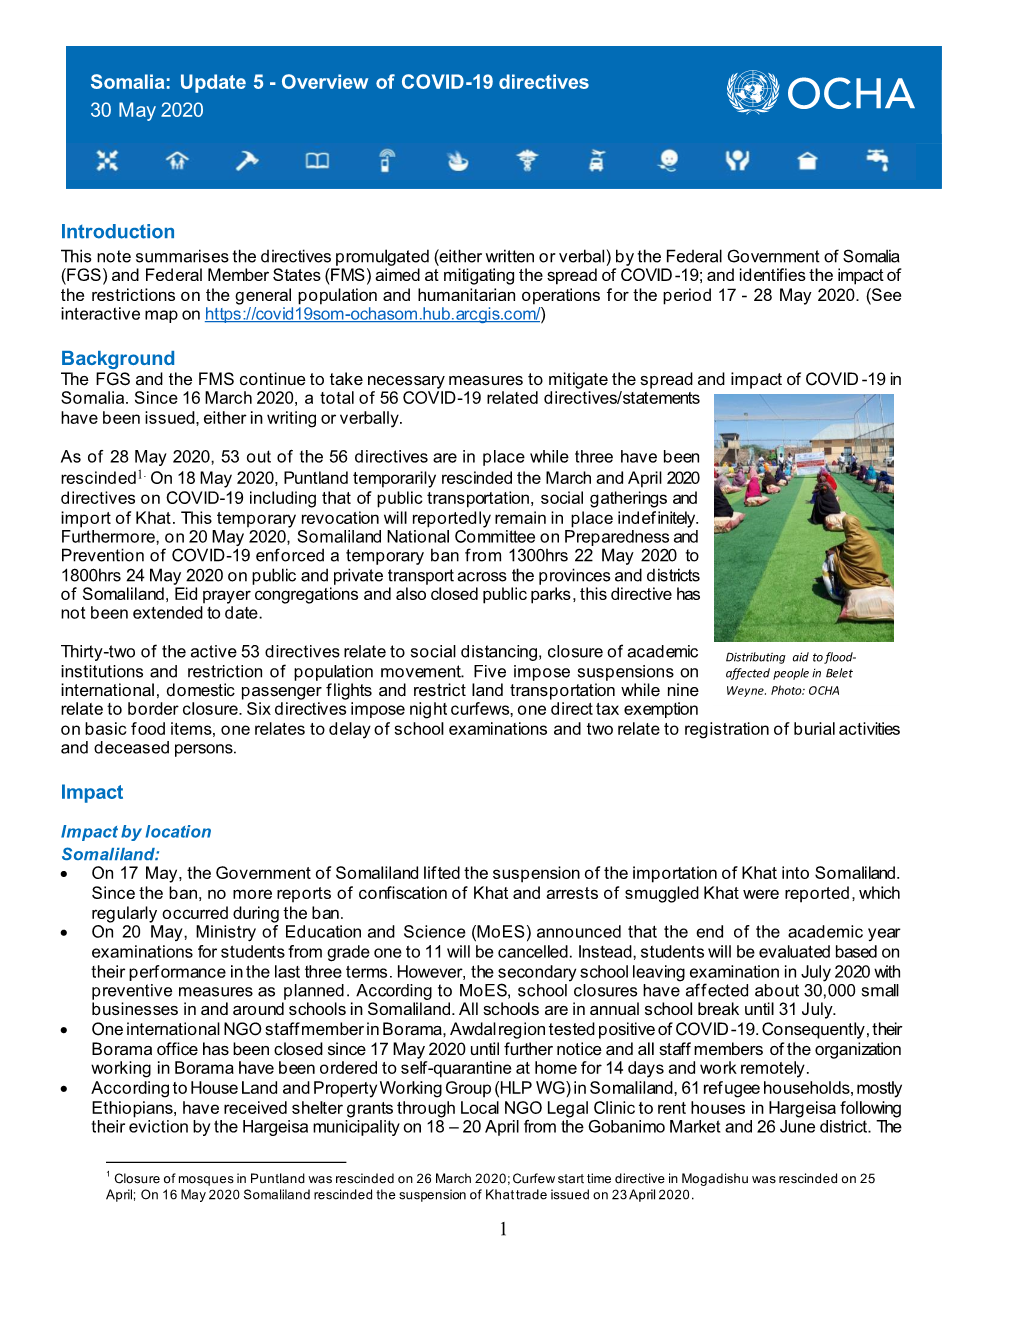 Somalia: Update 5 - Overview of COVID-19 Directives 30 May 2020